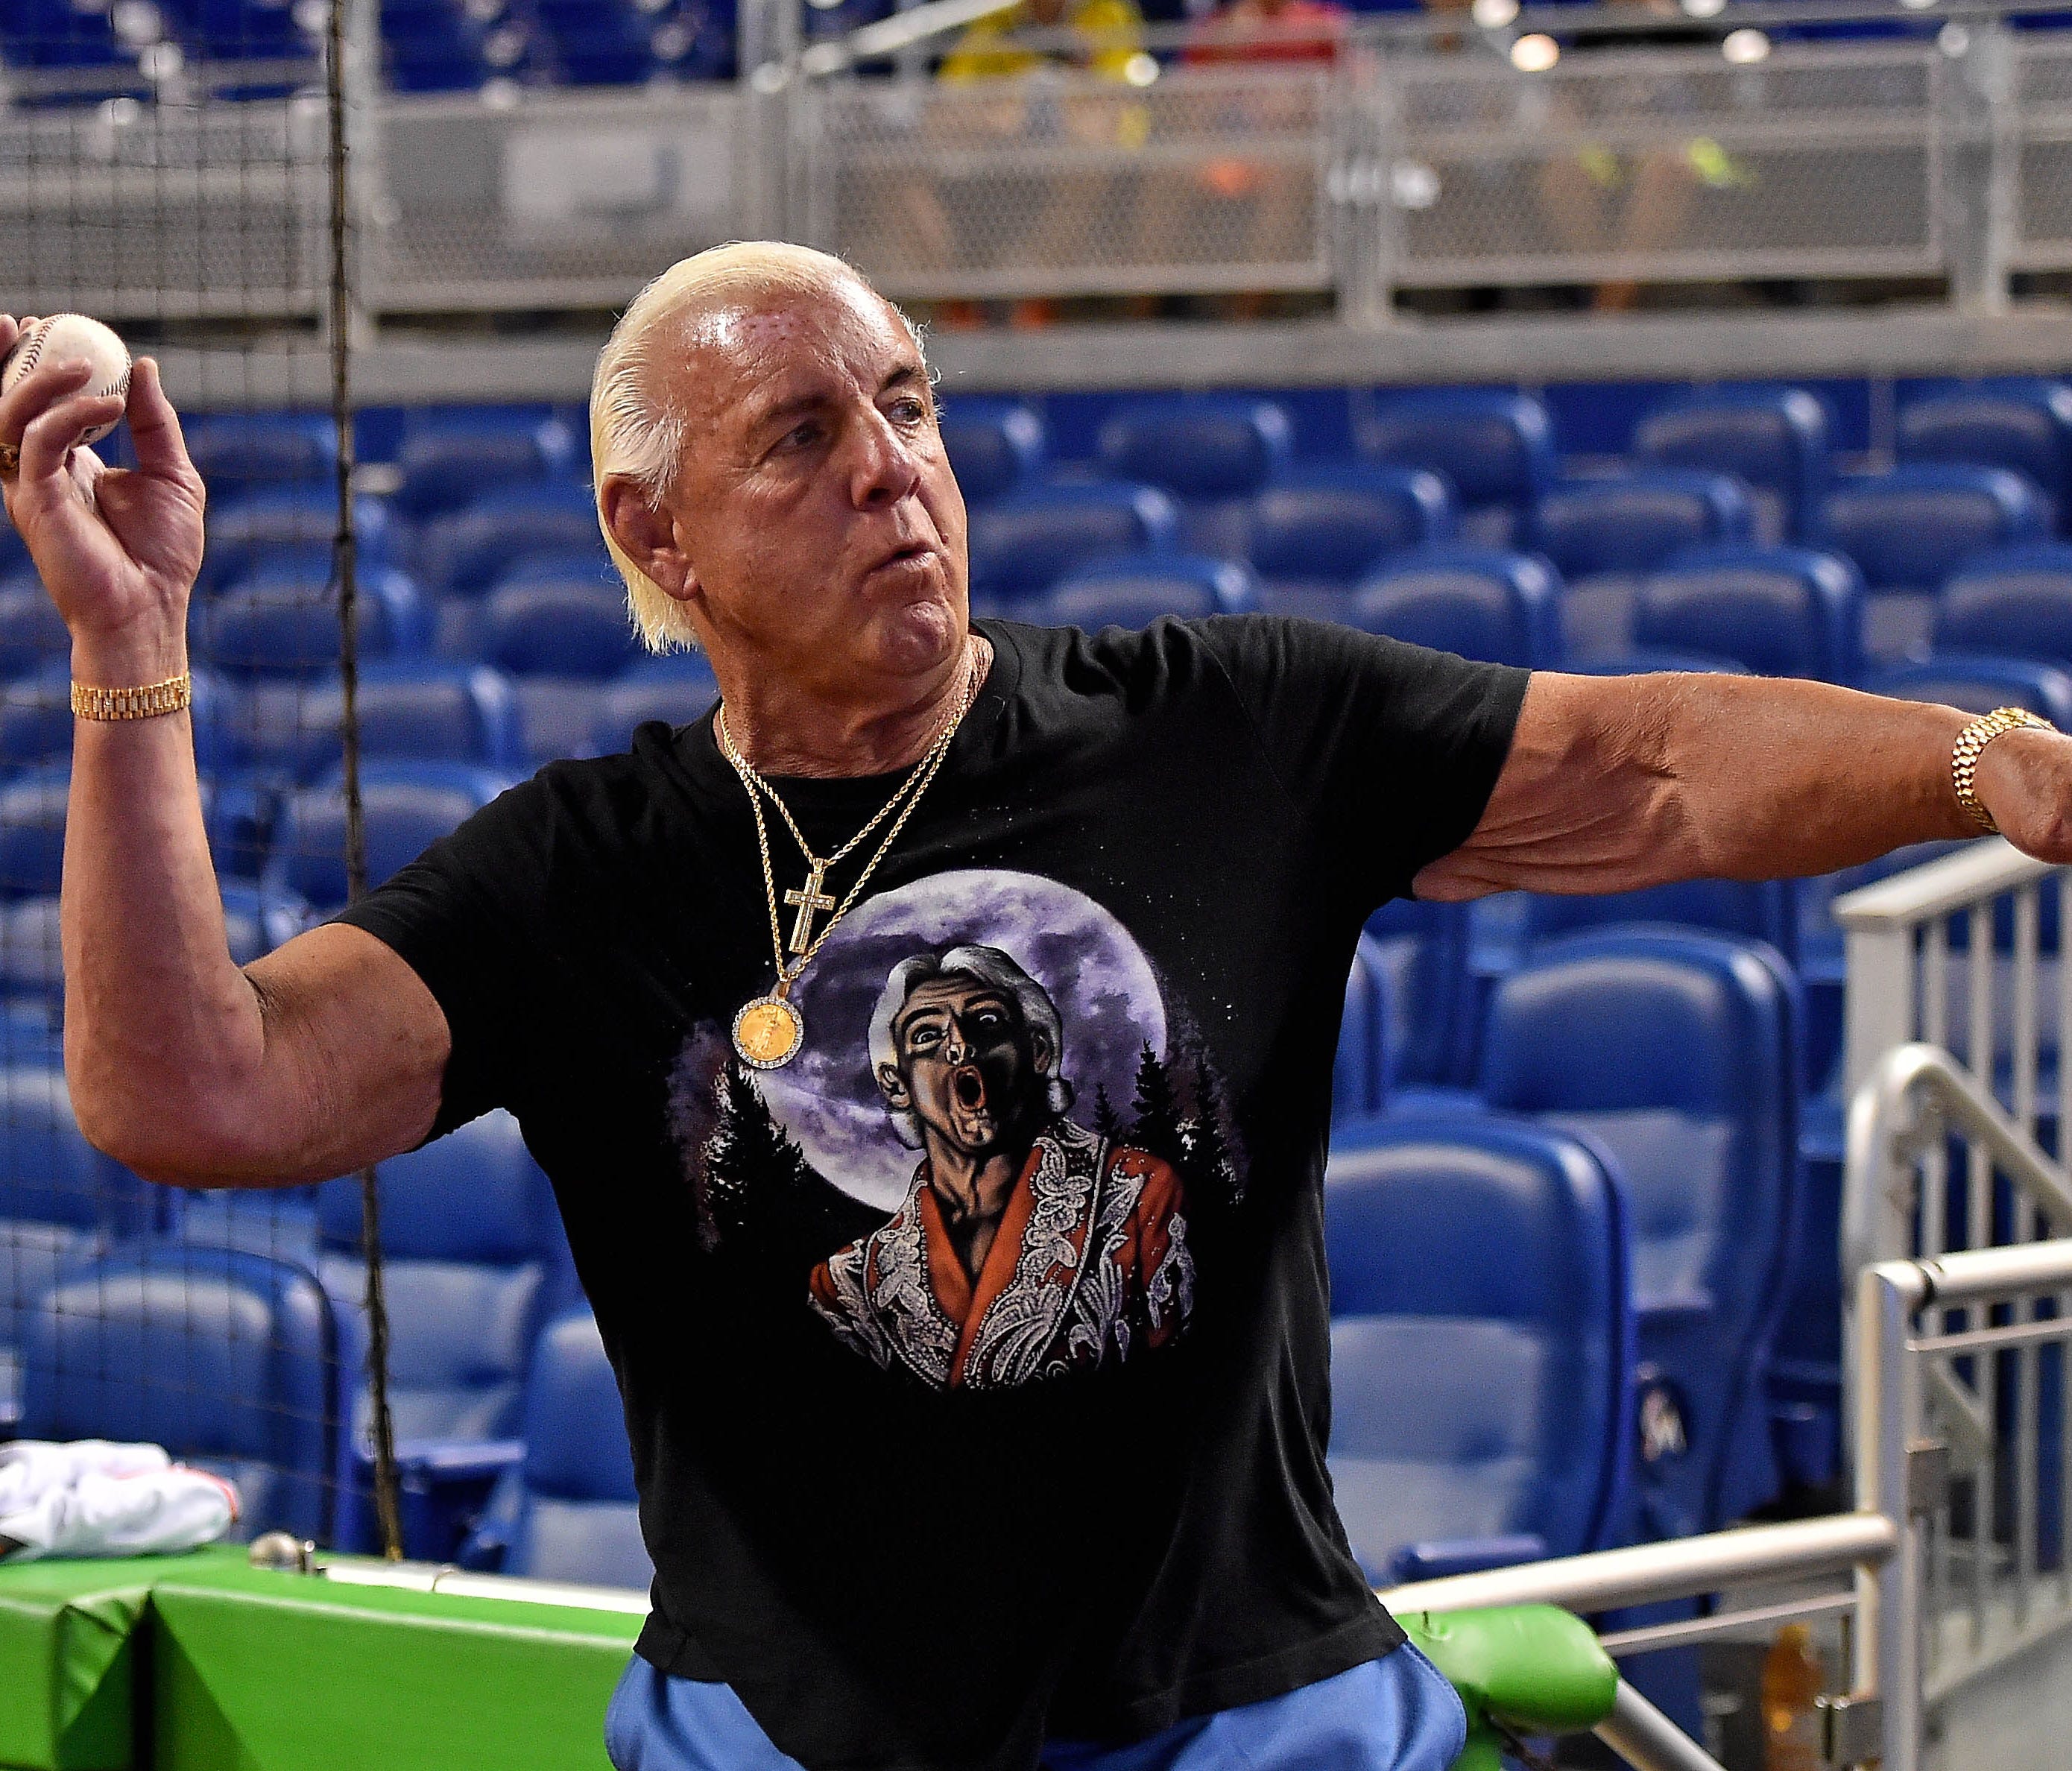 Ric Flair warms up before throwing out the first pitch at Marlins Park prior to the game between the Cincinnati Reds and the Miami Marlins game on July 28.